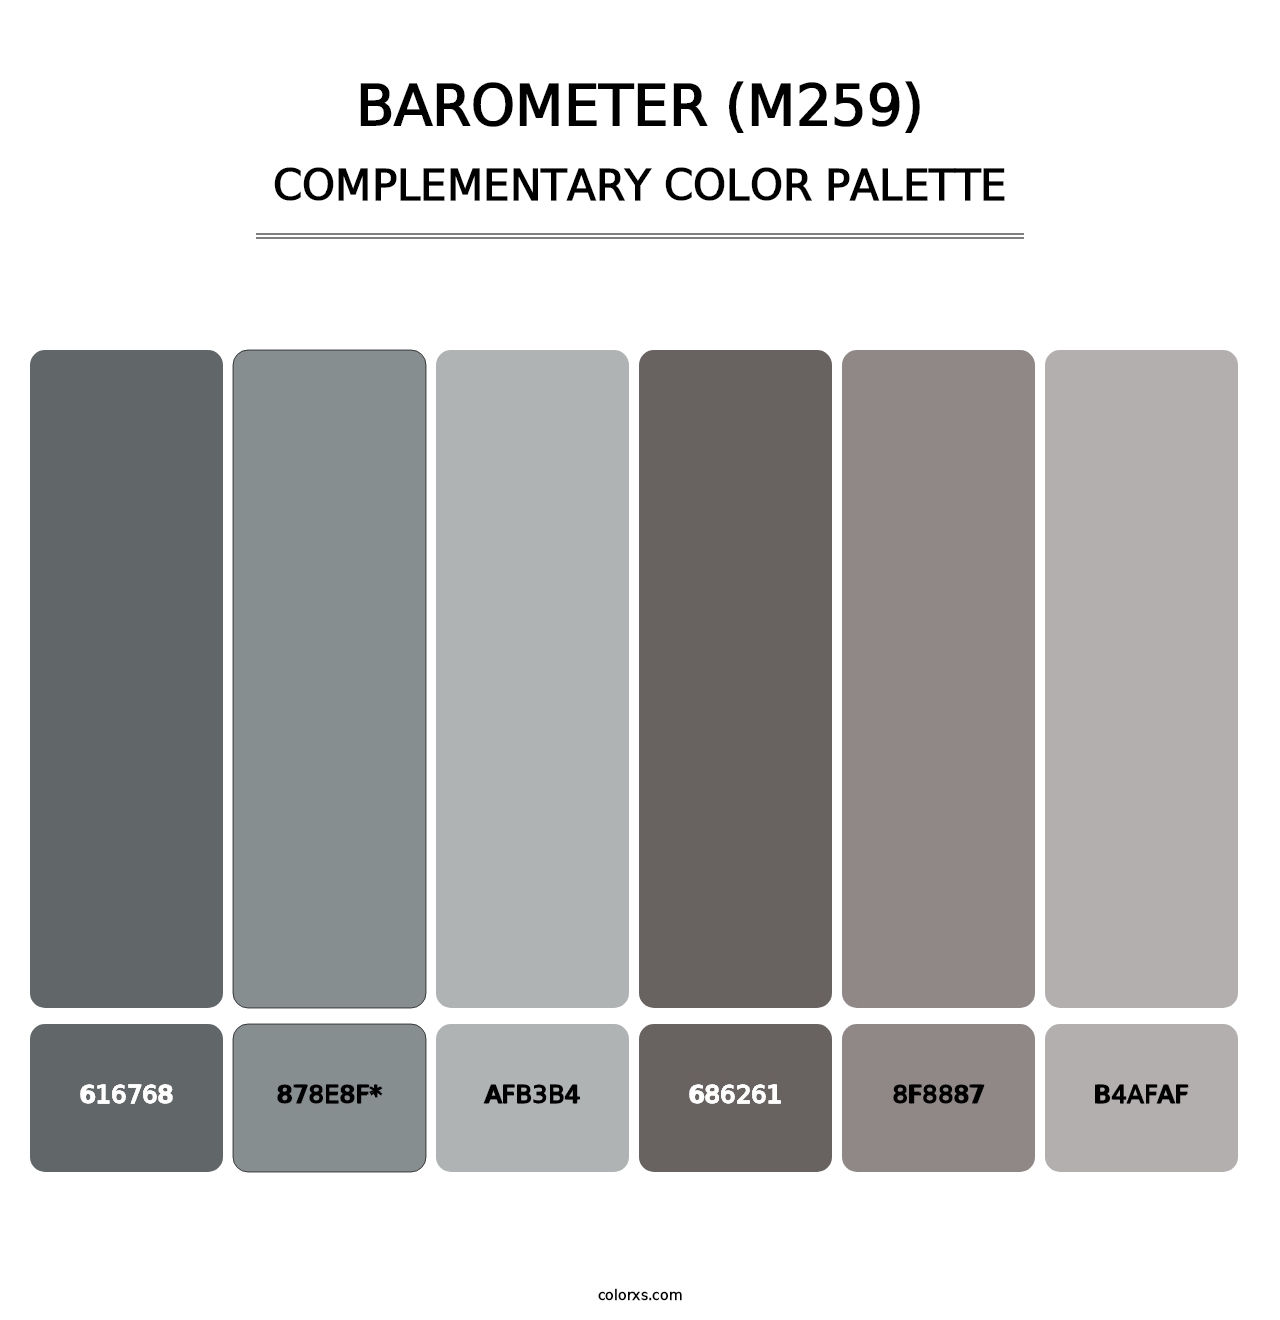 Barometer (M259) - Complementary Color Palette